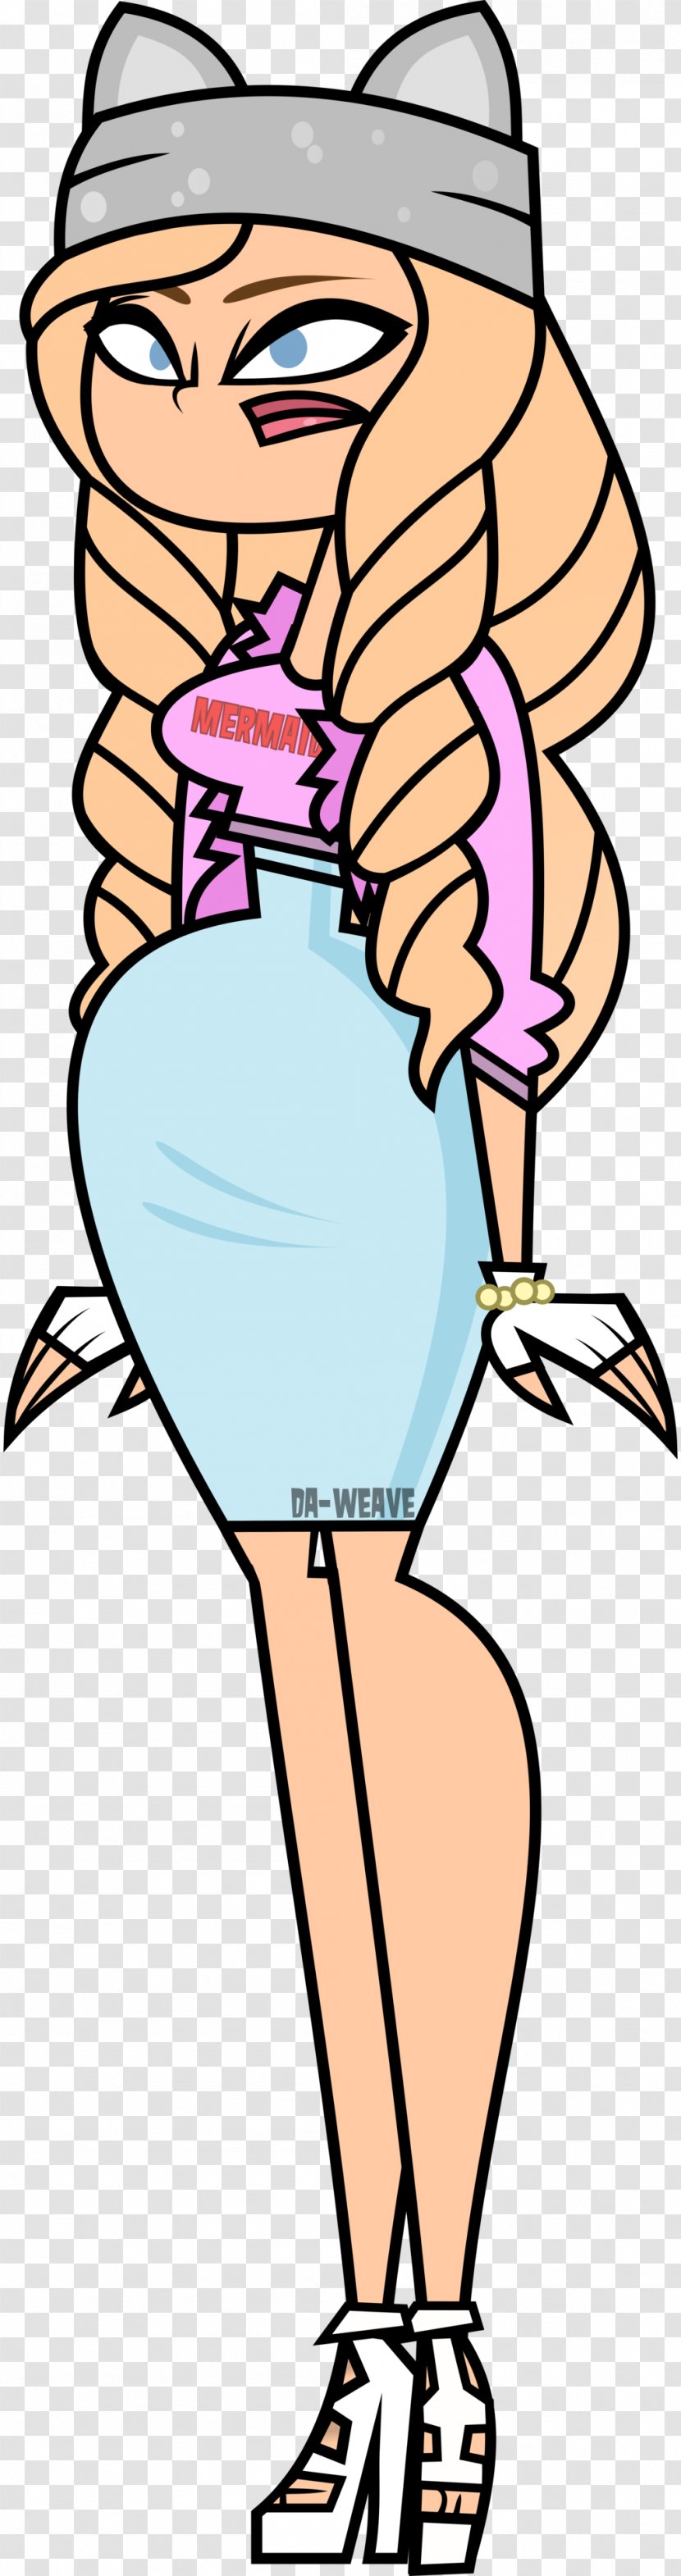 Chanel Oberlin #5 #3 Cartoon Female - Drama Queen Transparent PNG